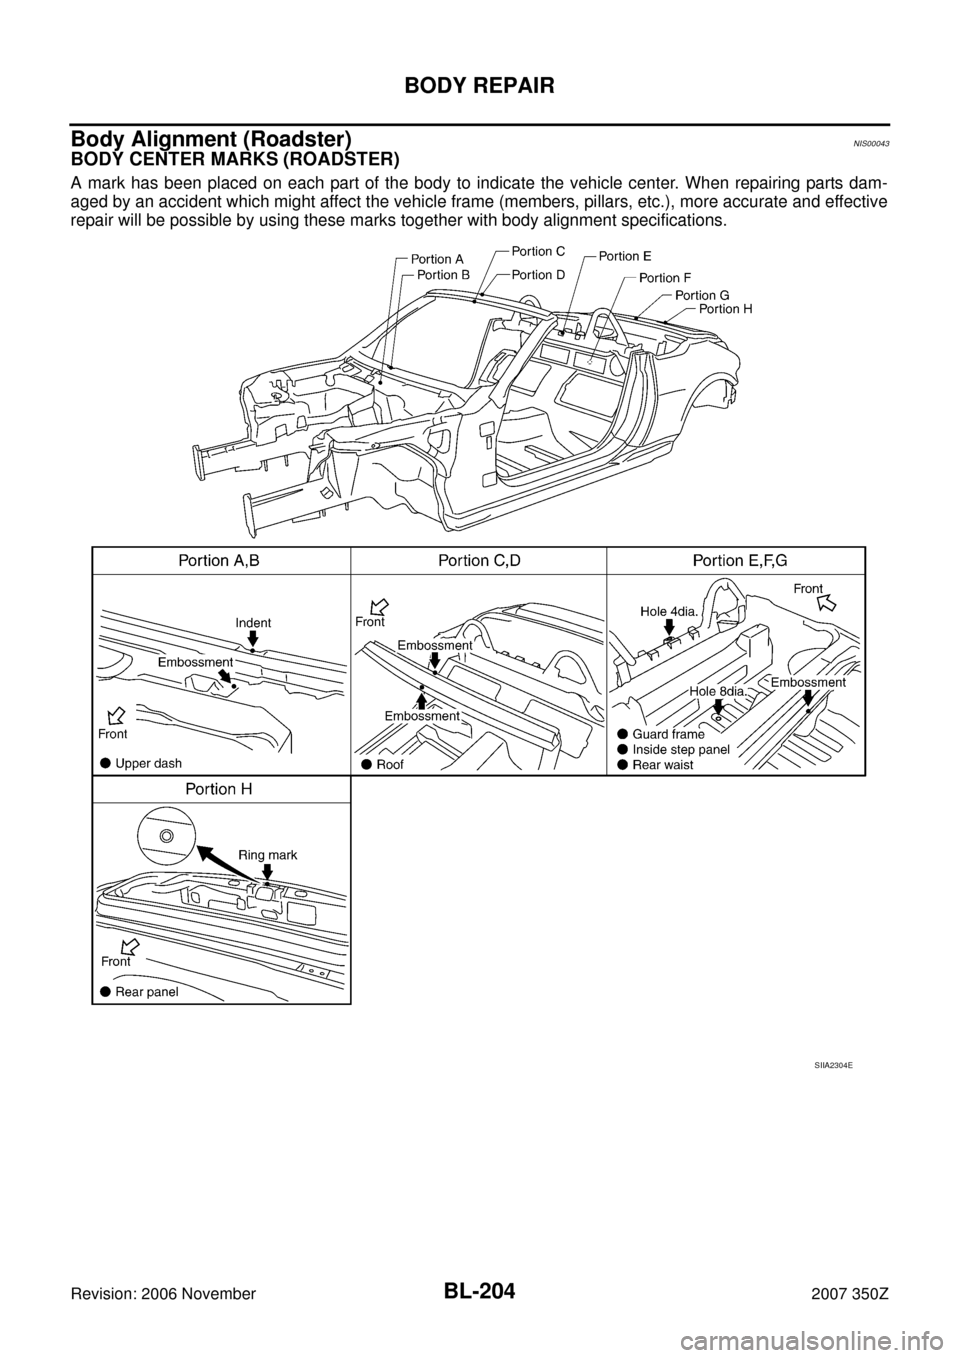 NISSAN 350Z 2007 Z33 Body, Lock And Security System Workshop Manual BL-204
BODY REPAIR
Revision: 2006 November2007 350Z
Body Alignment (Roadster)NIS00043
BODY CENTER MARKS (ROADSTER)
A mark has been placed on each part of the body to indicate the vehicle center. When 